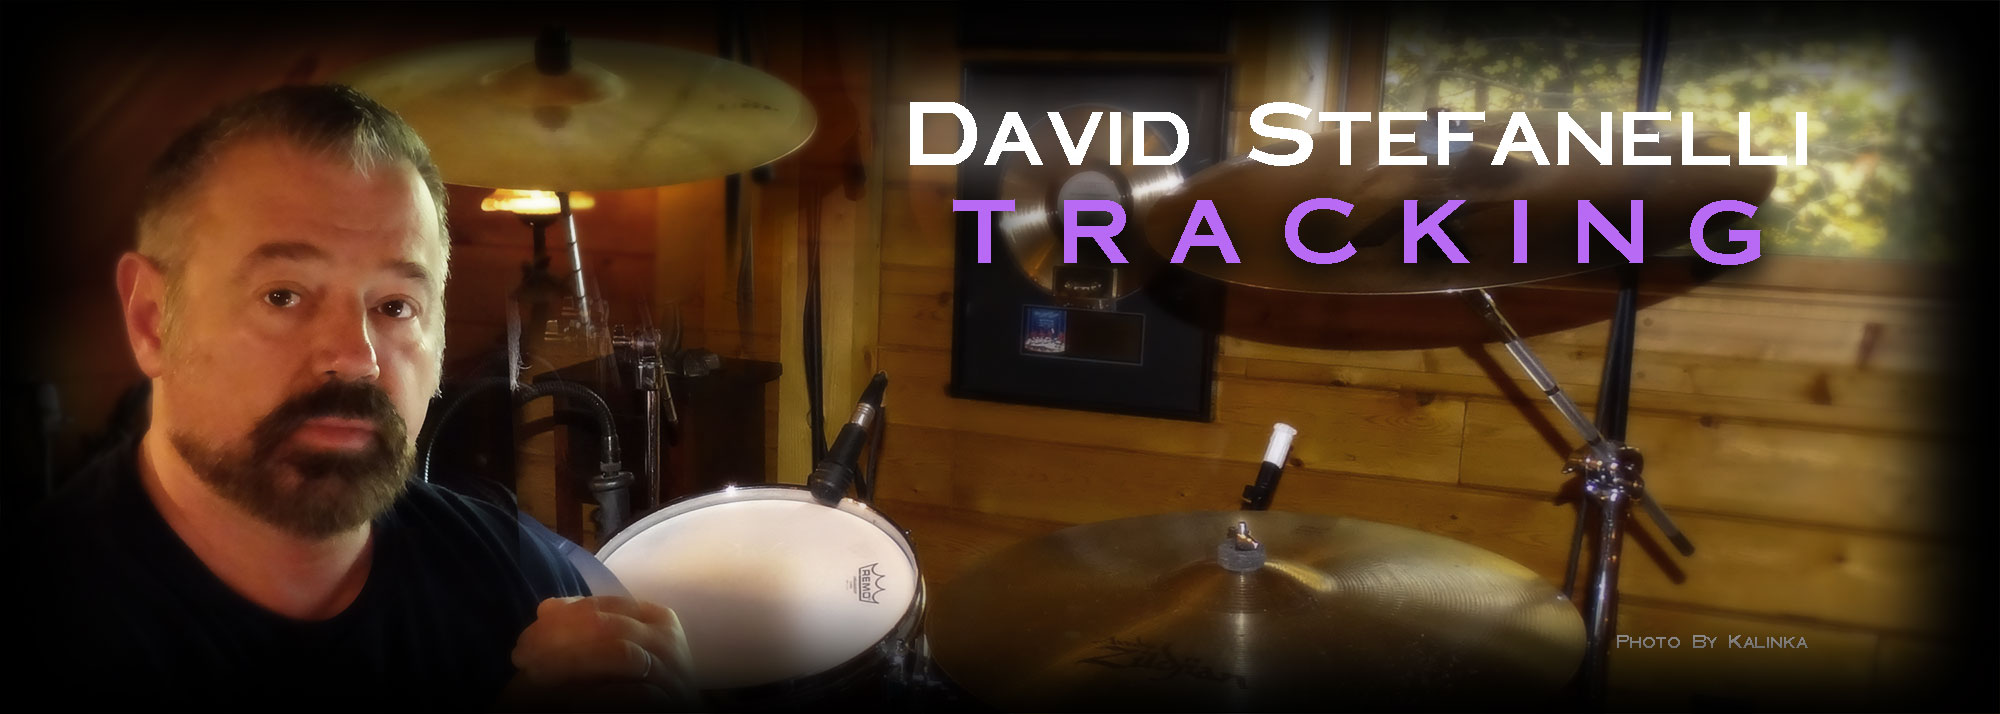 David Stefanelli. Drummer, percussionist, guitarist, and music producer.